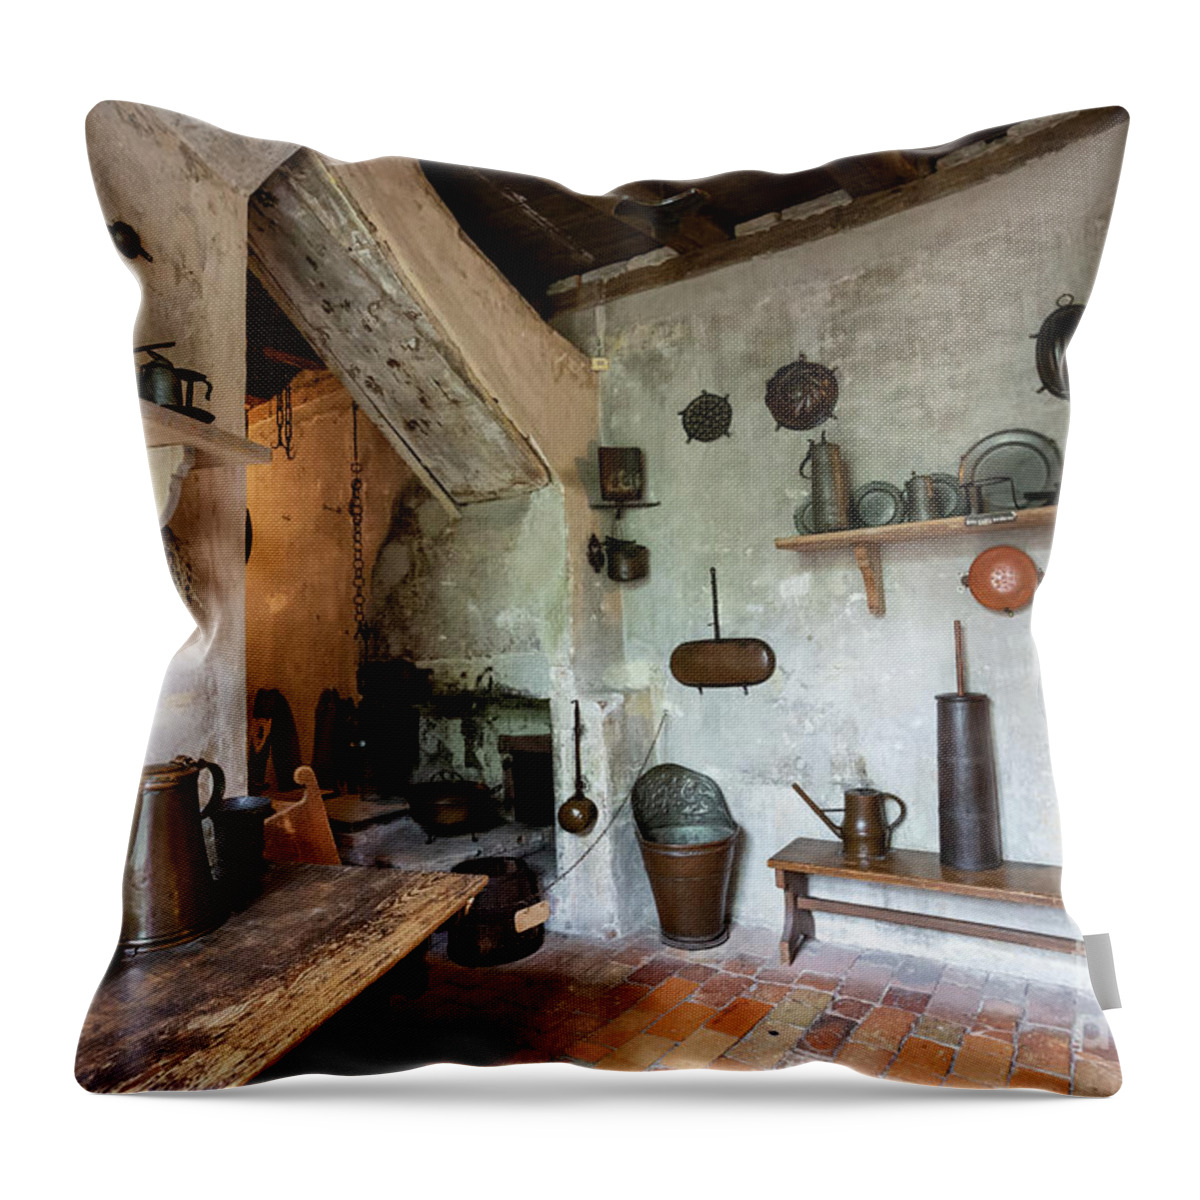 Kitchen Throw Pillow featuring the photograph Medieval Kitchen Interior by Eva Lechner